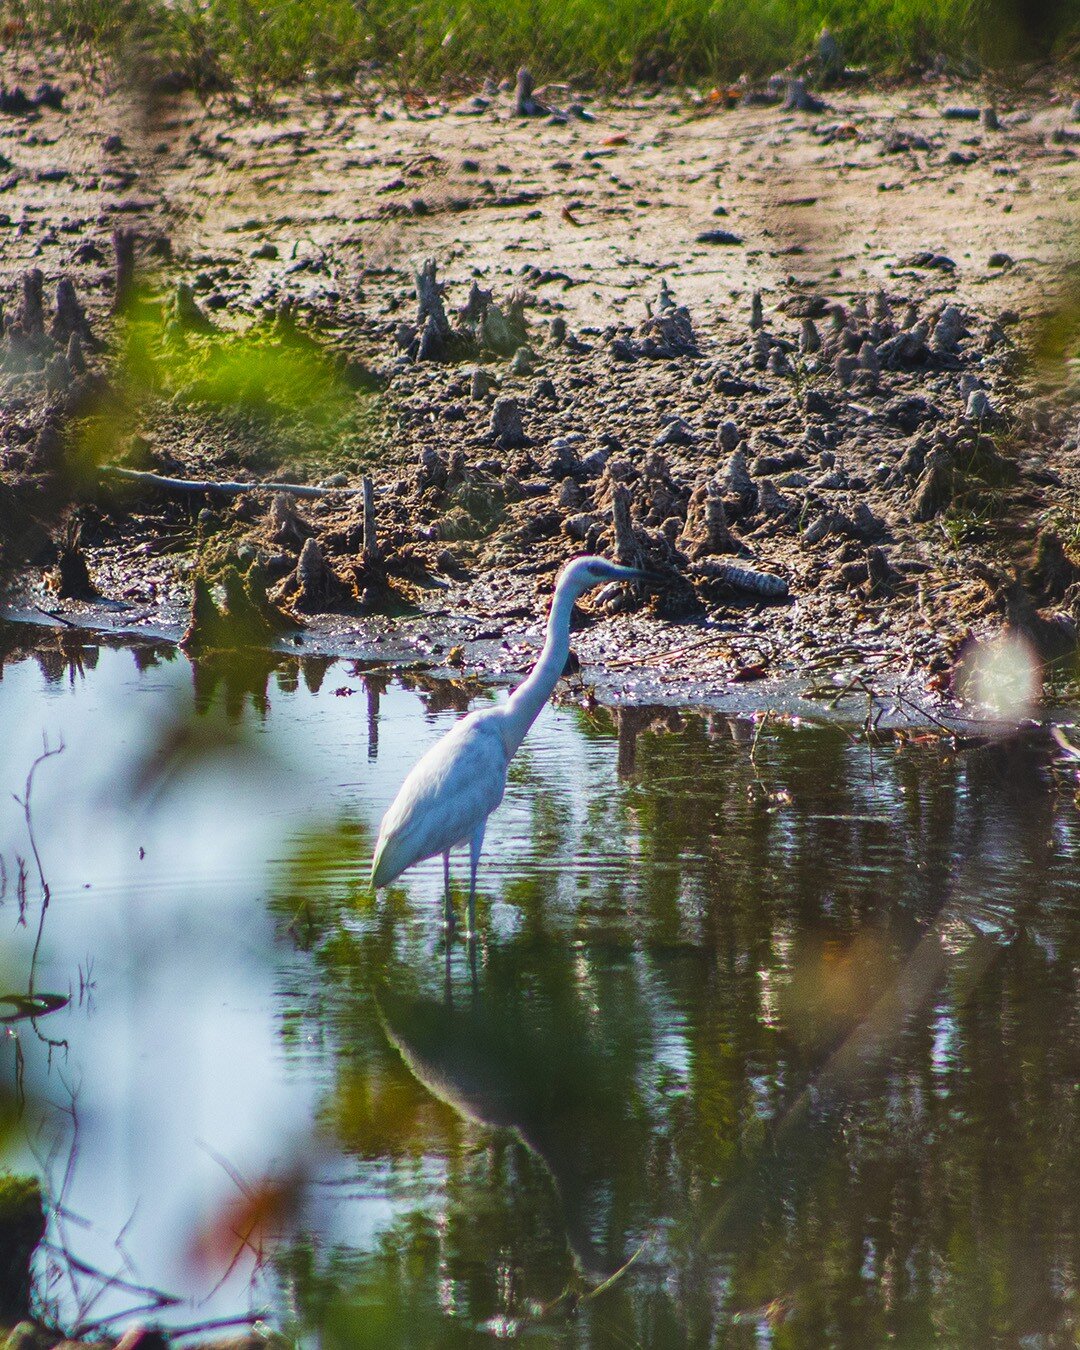 Had a chance to visit Marsh Trail at Ten Thousand Islands Wildlife Refuge. It was great to just enjoy the nature and observe all the animals in their habitat. What are other good places in Naples for wildlife photography?

#wildlifephotograpy #animal